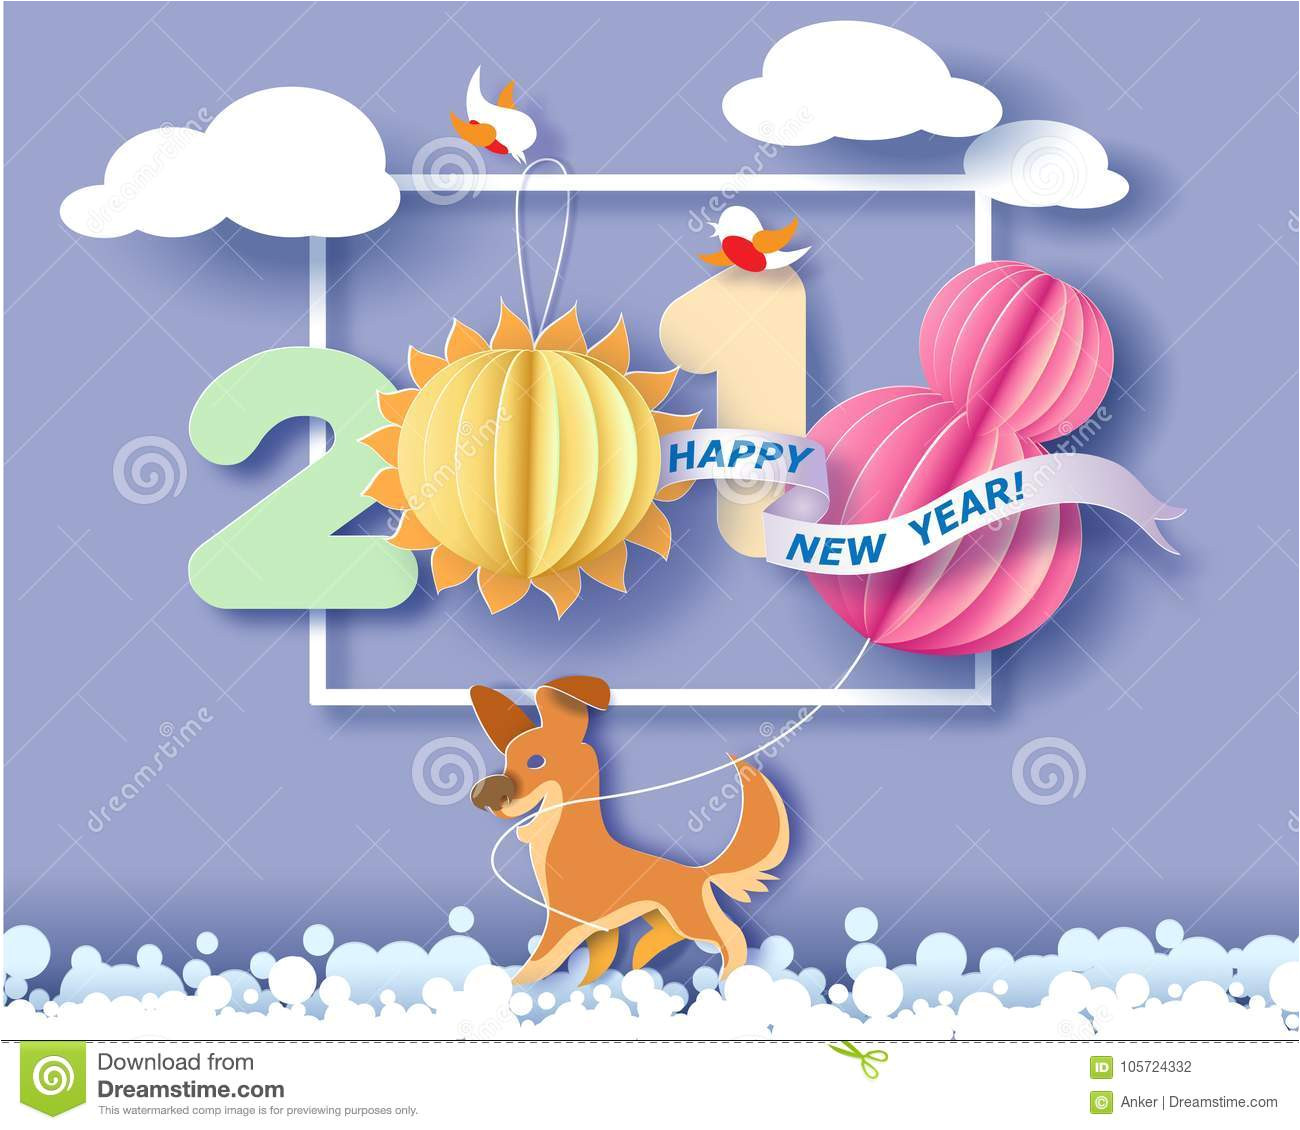 happy new year card color paper cut design craft winter landscape birds dog digit holiday merry christmas vector 105724332 jpg